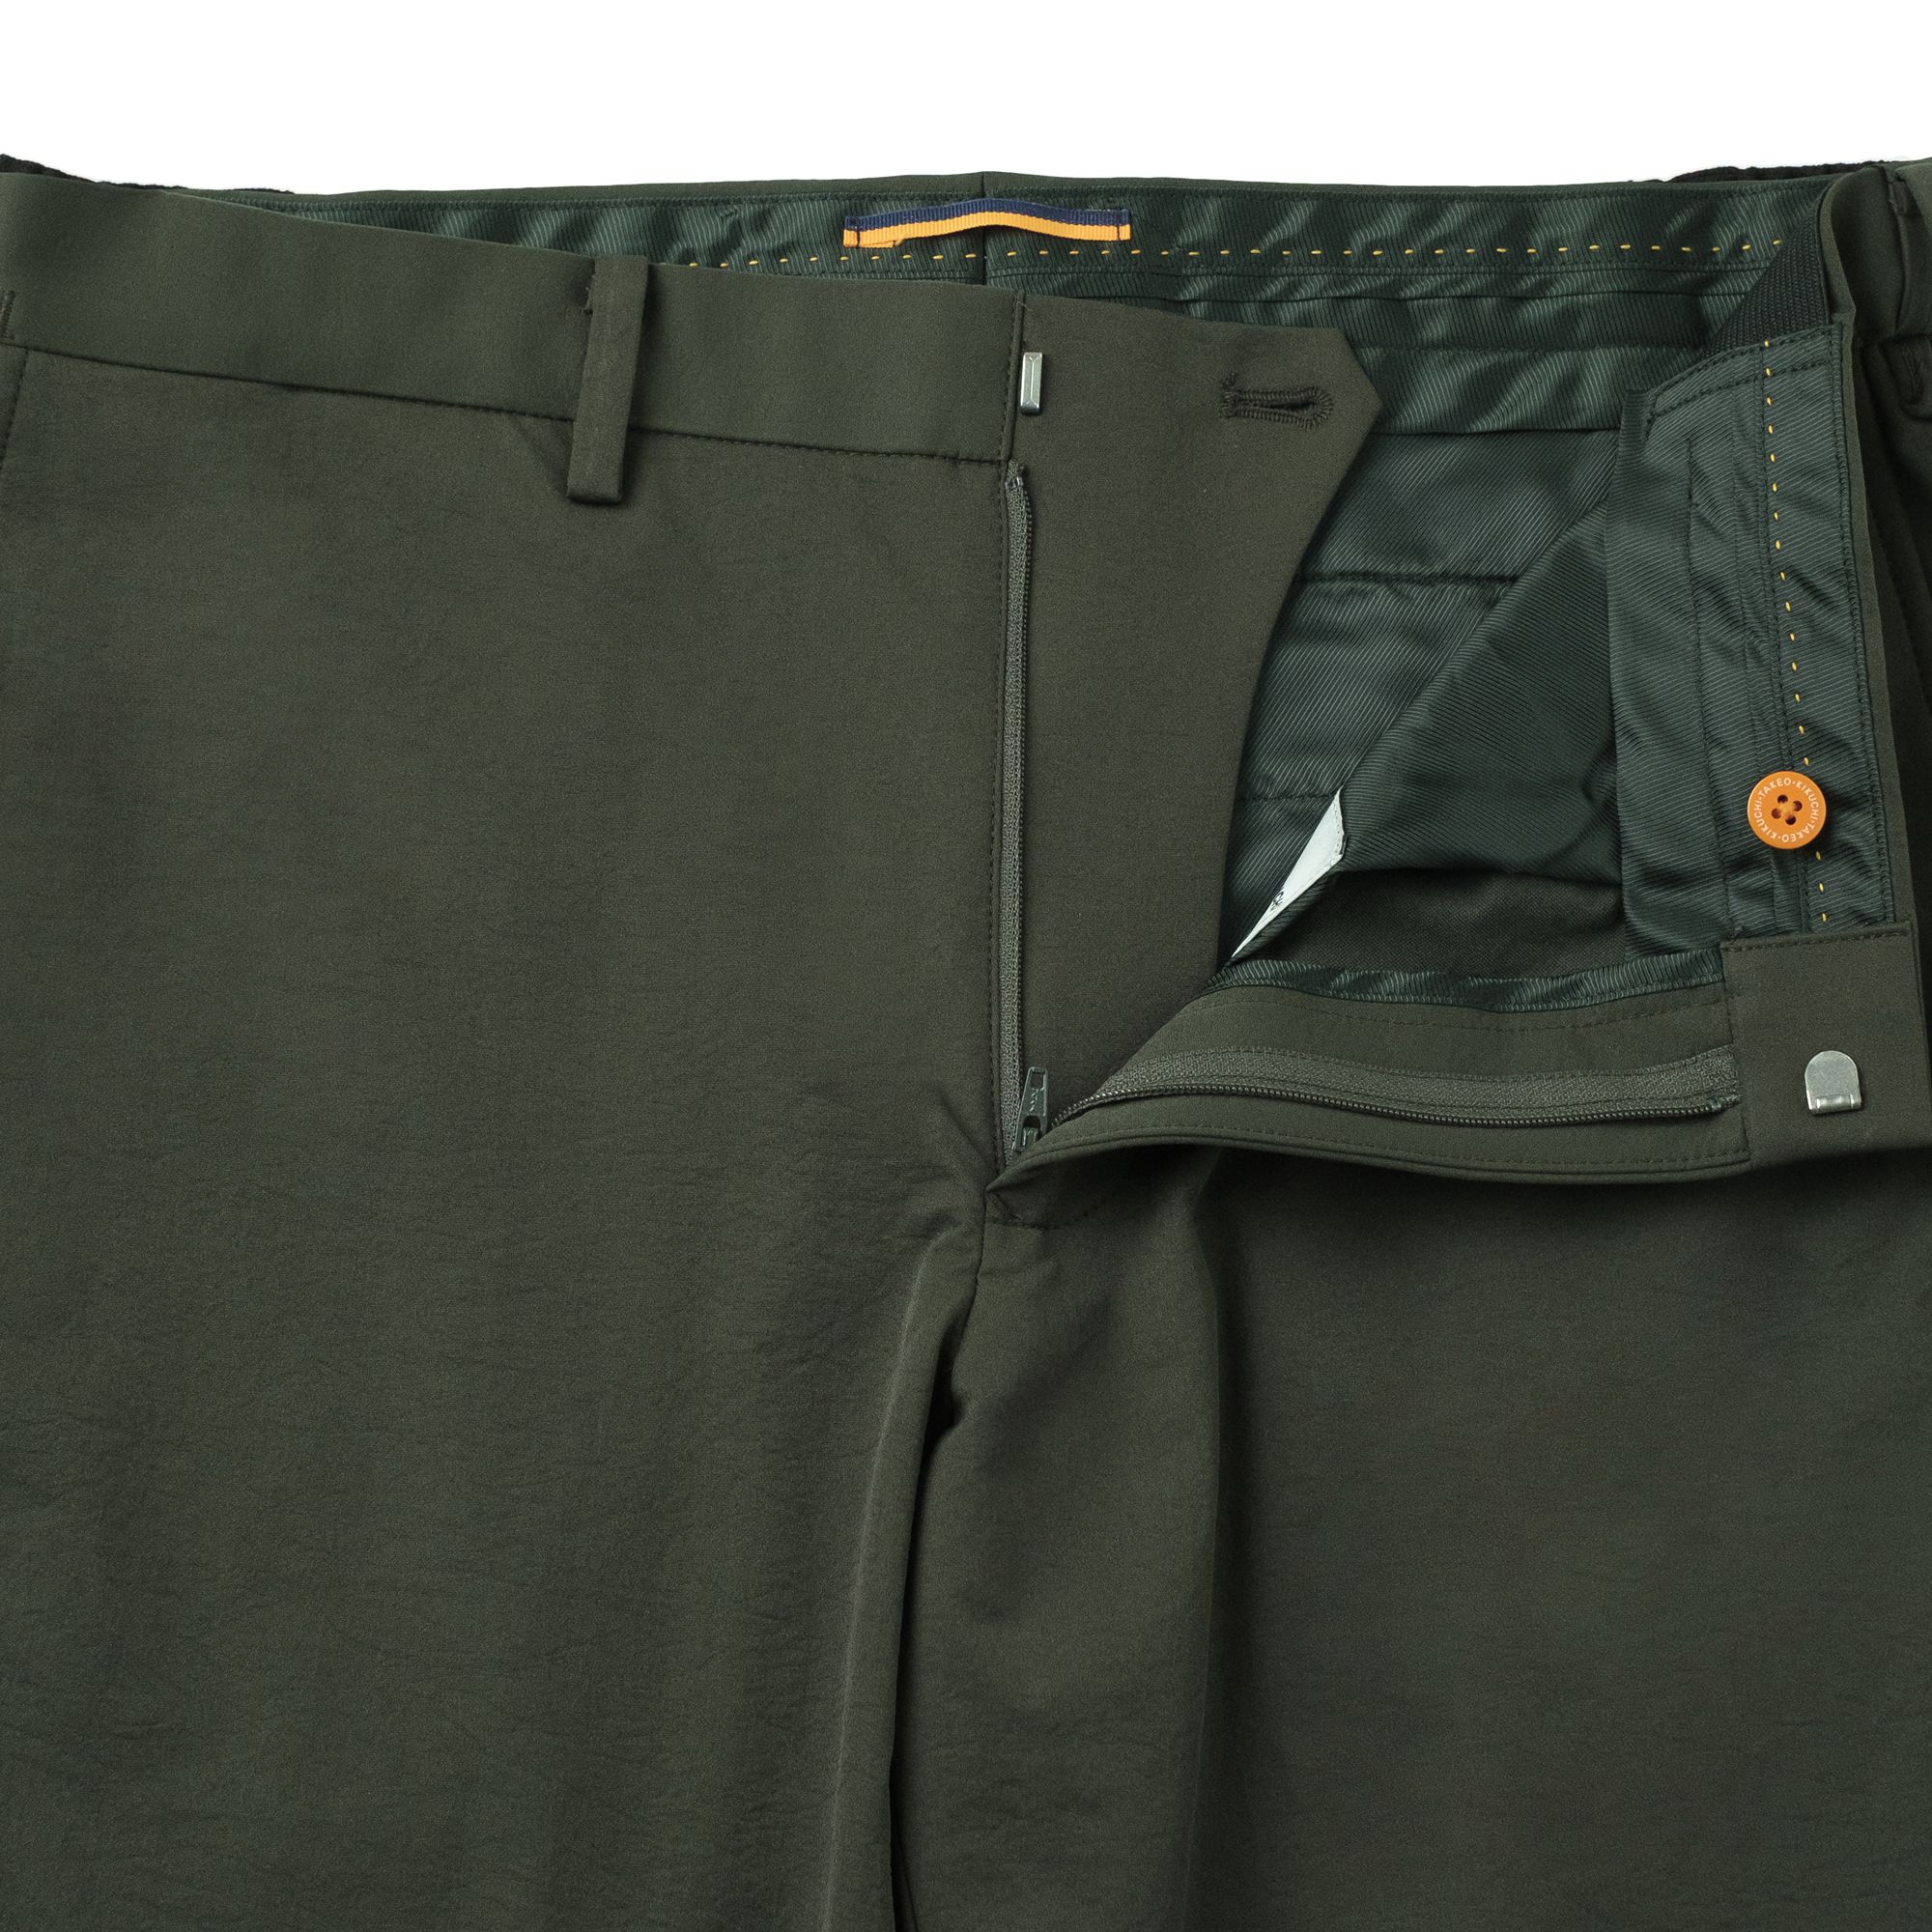 GREEN CS RELAX-COMFY 2WAY STRETCH PANTS (2)_result 2